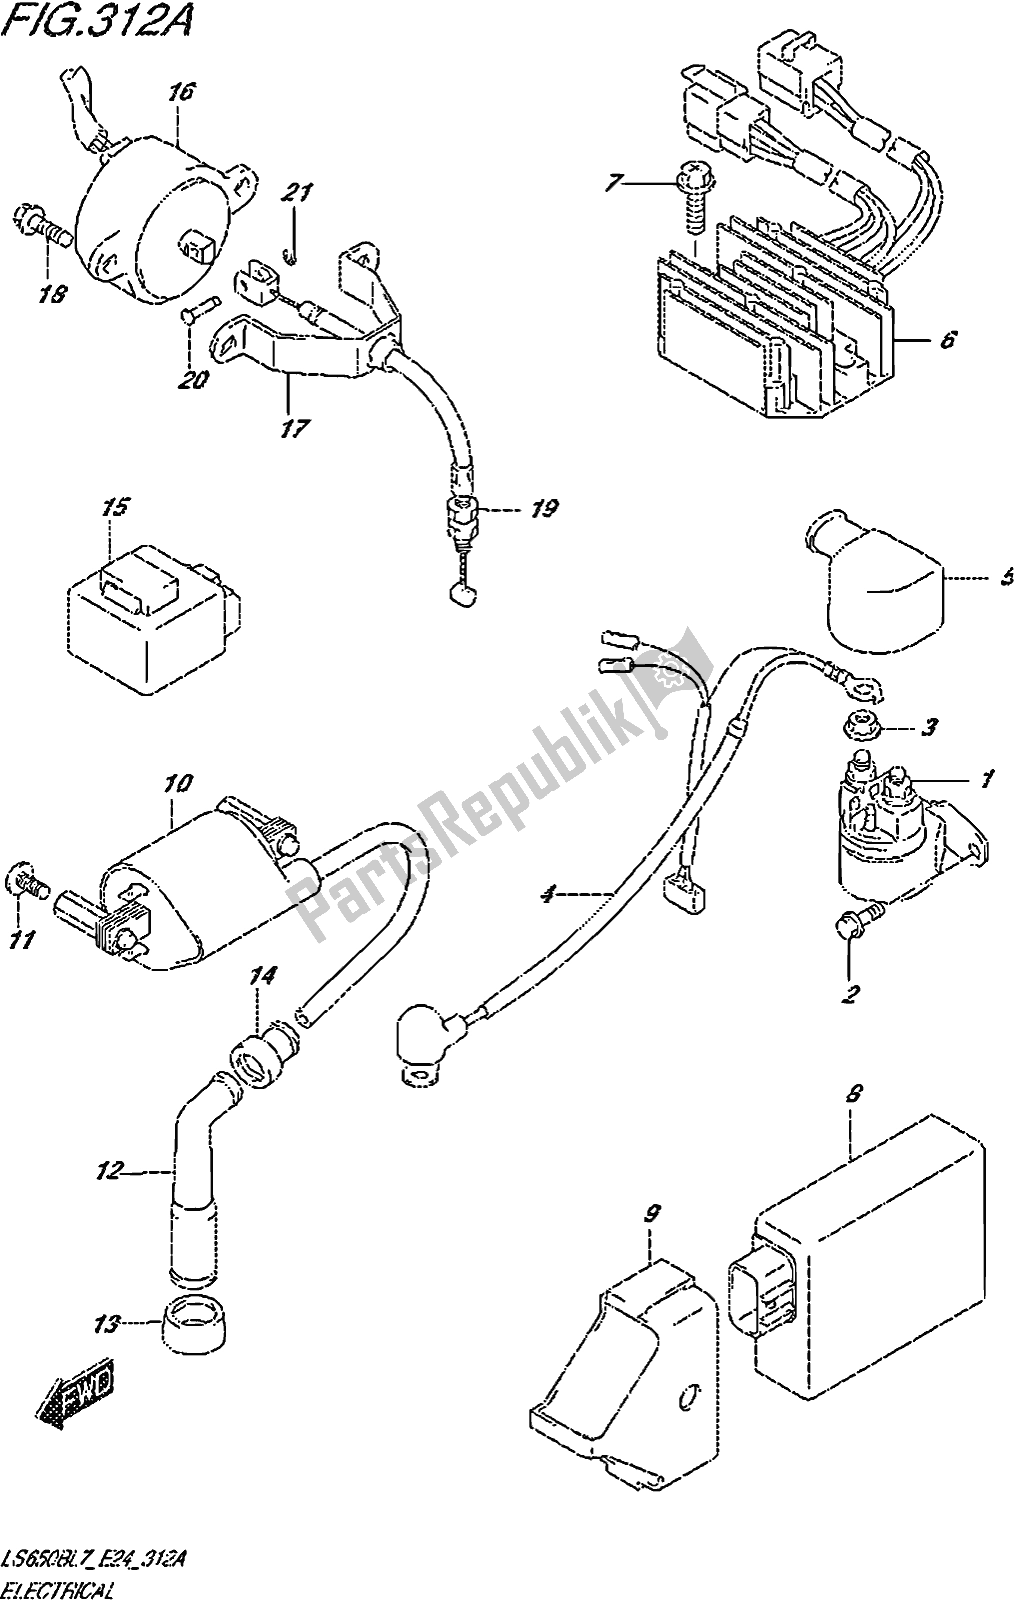 All parts for the Fig. 312a Electrical of the Suzuki LS 650B 2017